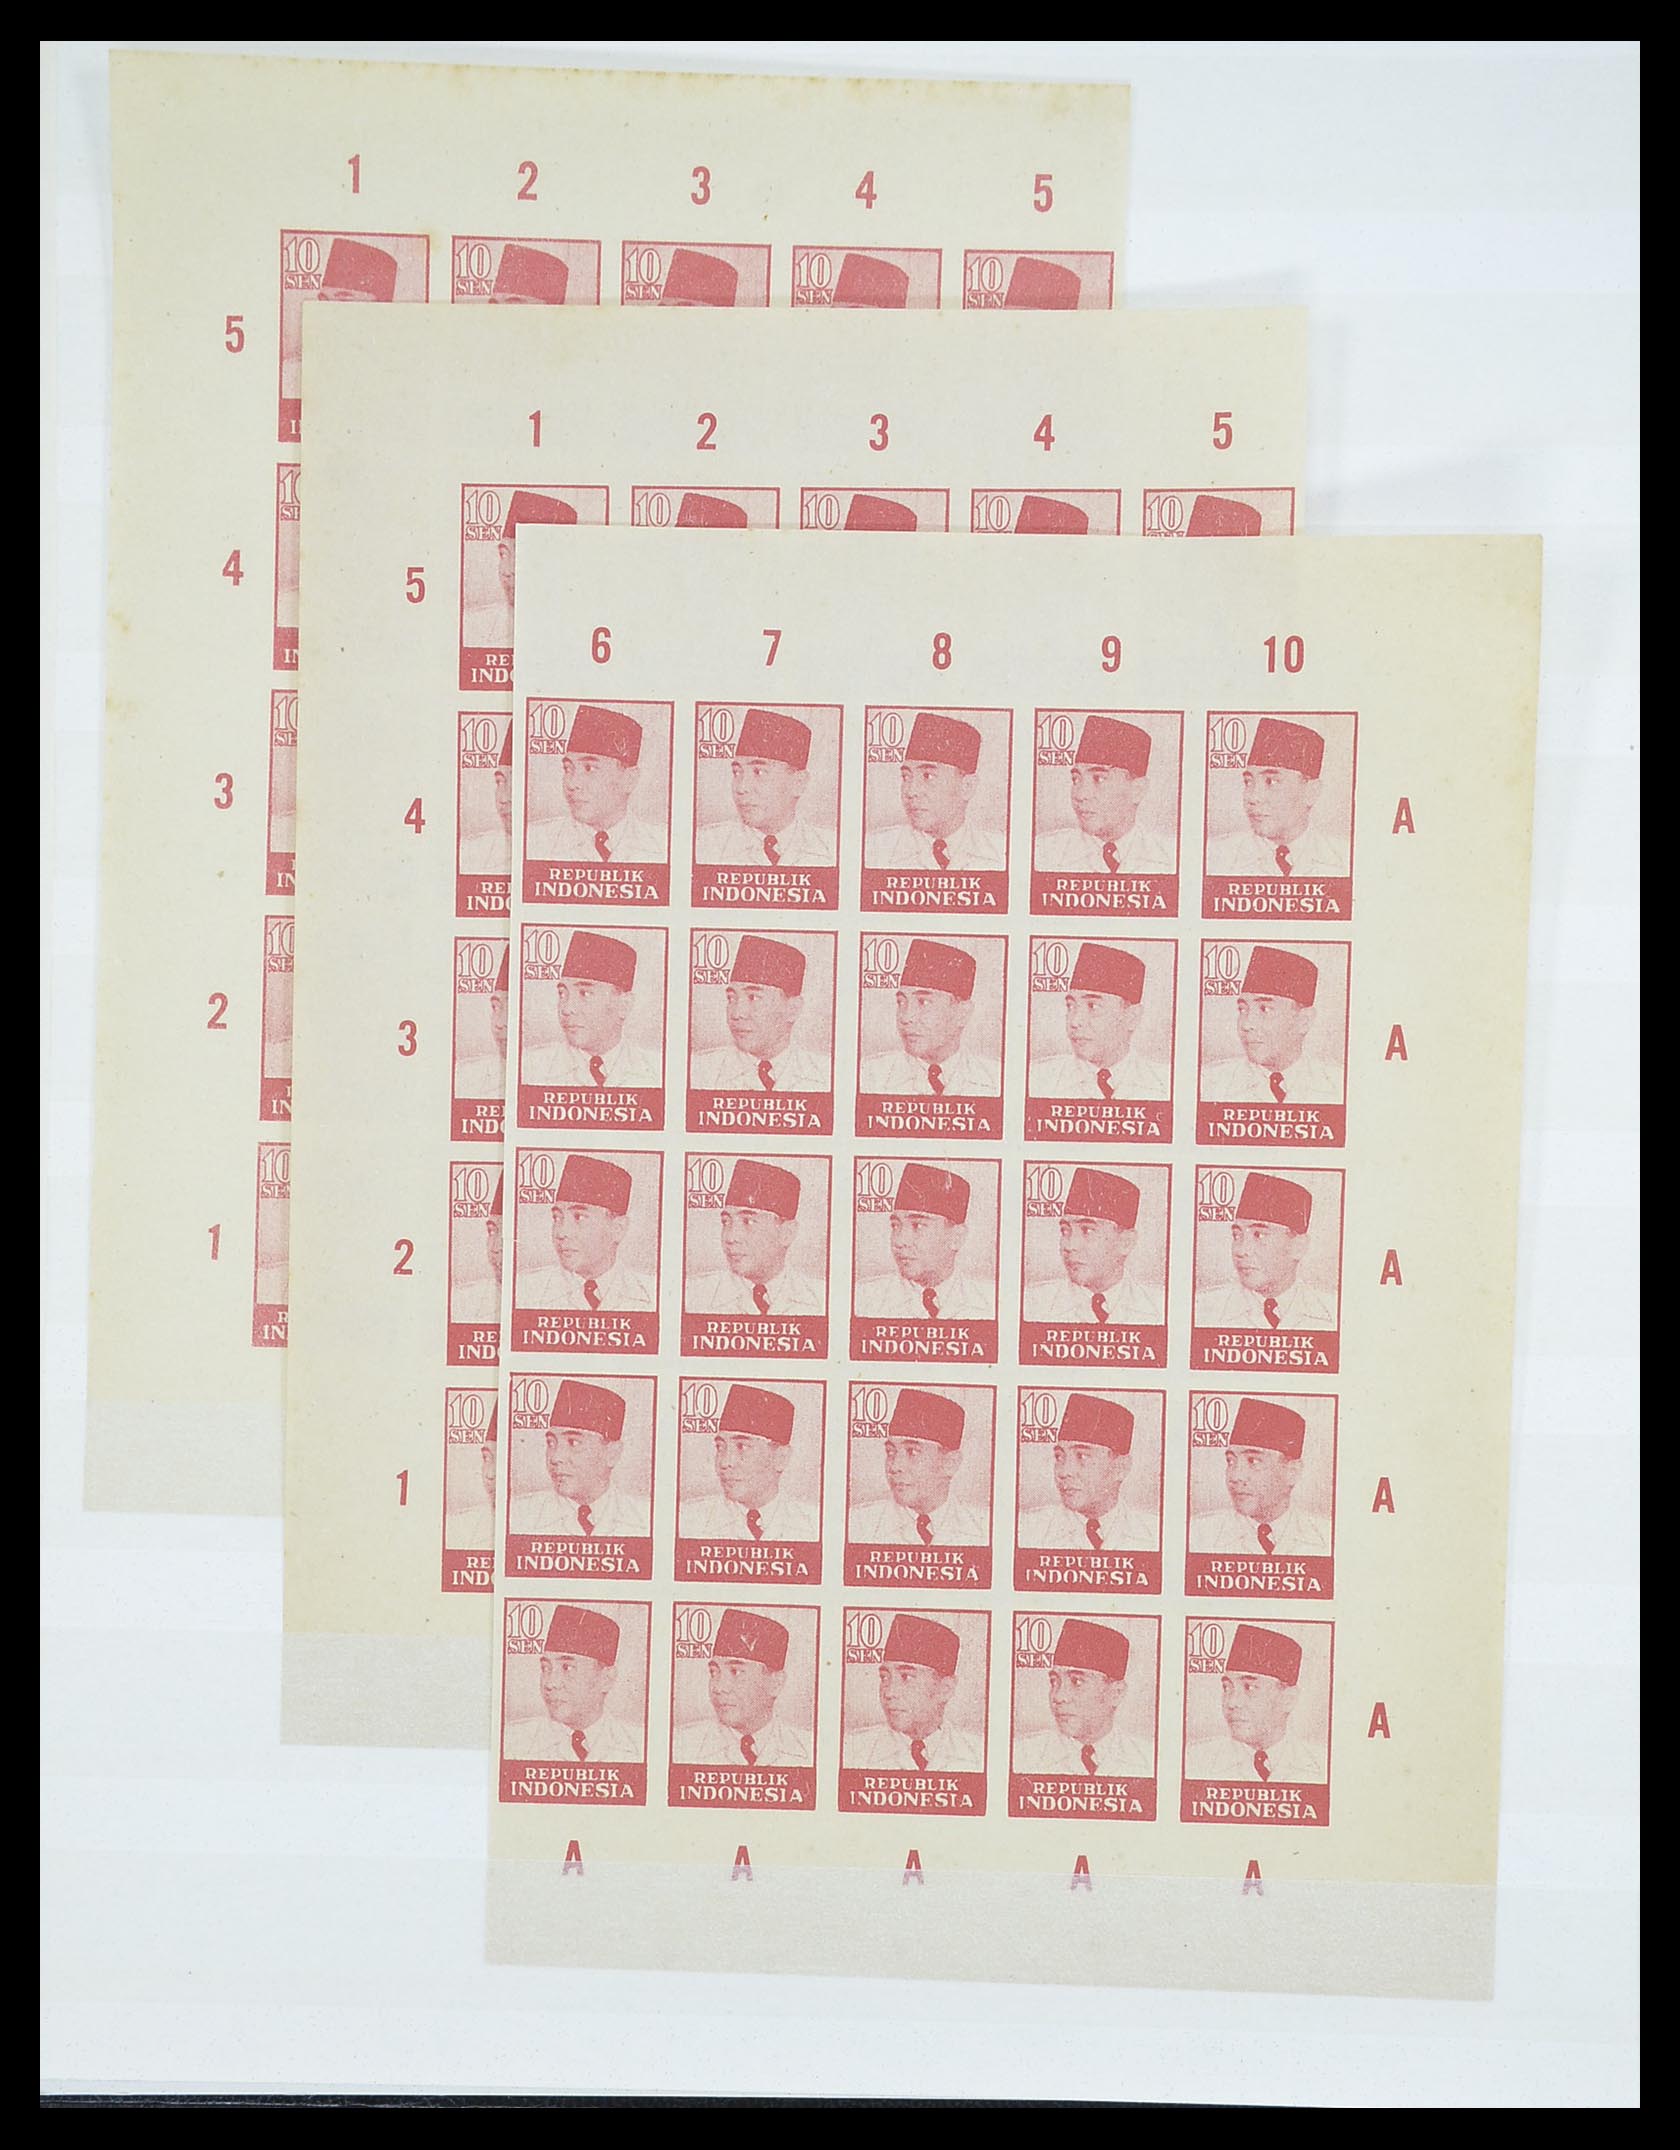 33489 016 - Stamp collection 33489 Japanese occupation Dutch east Indies and interim